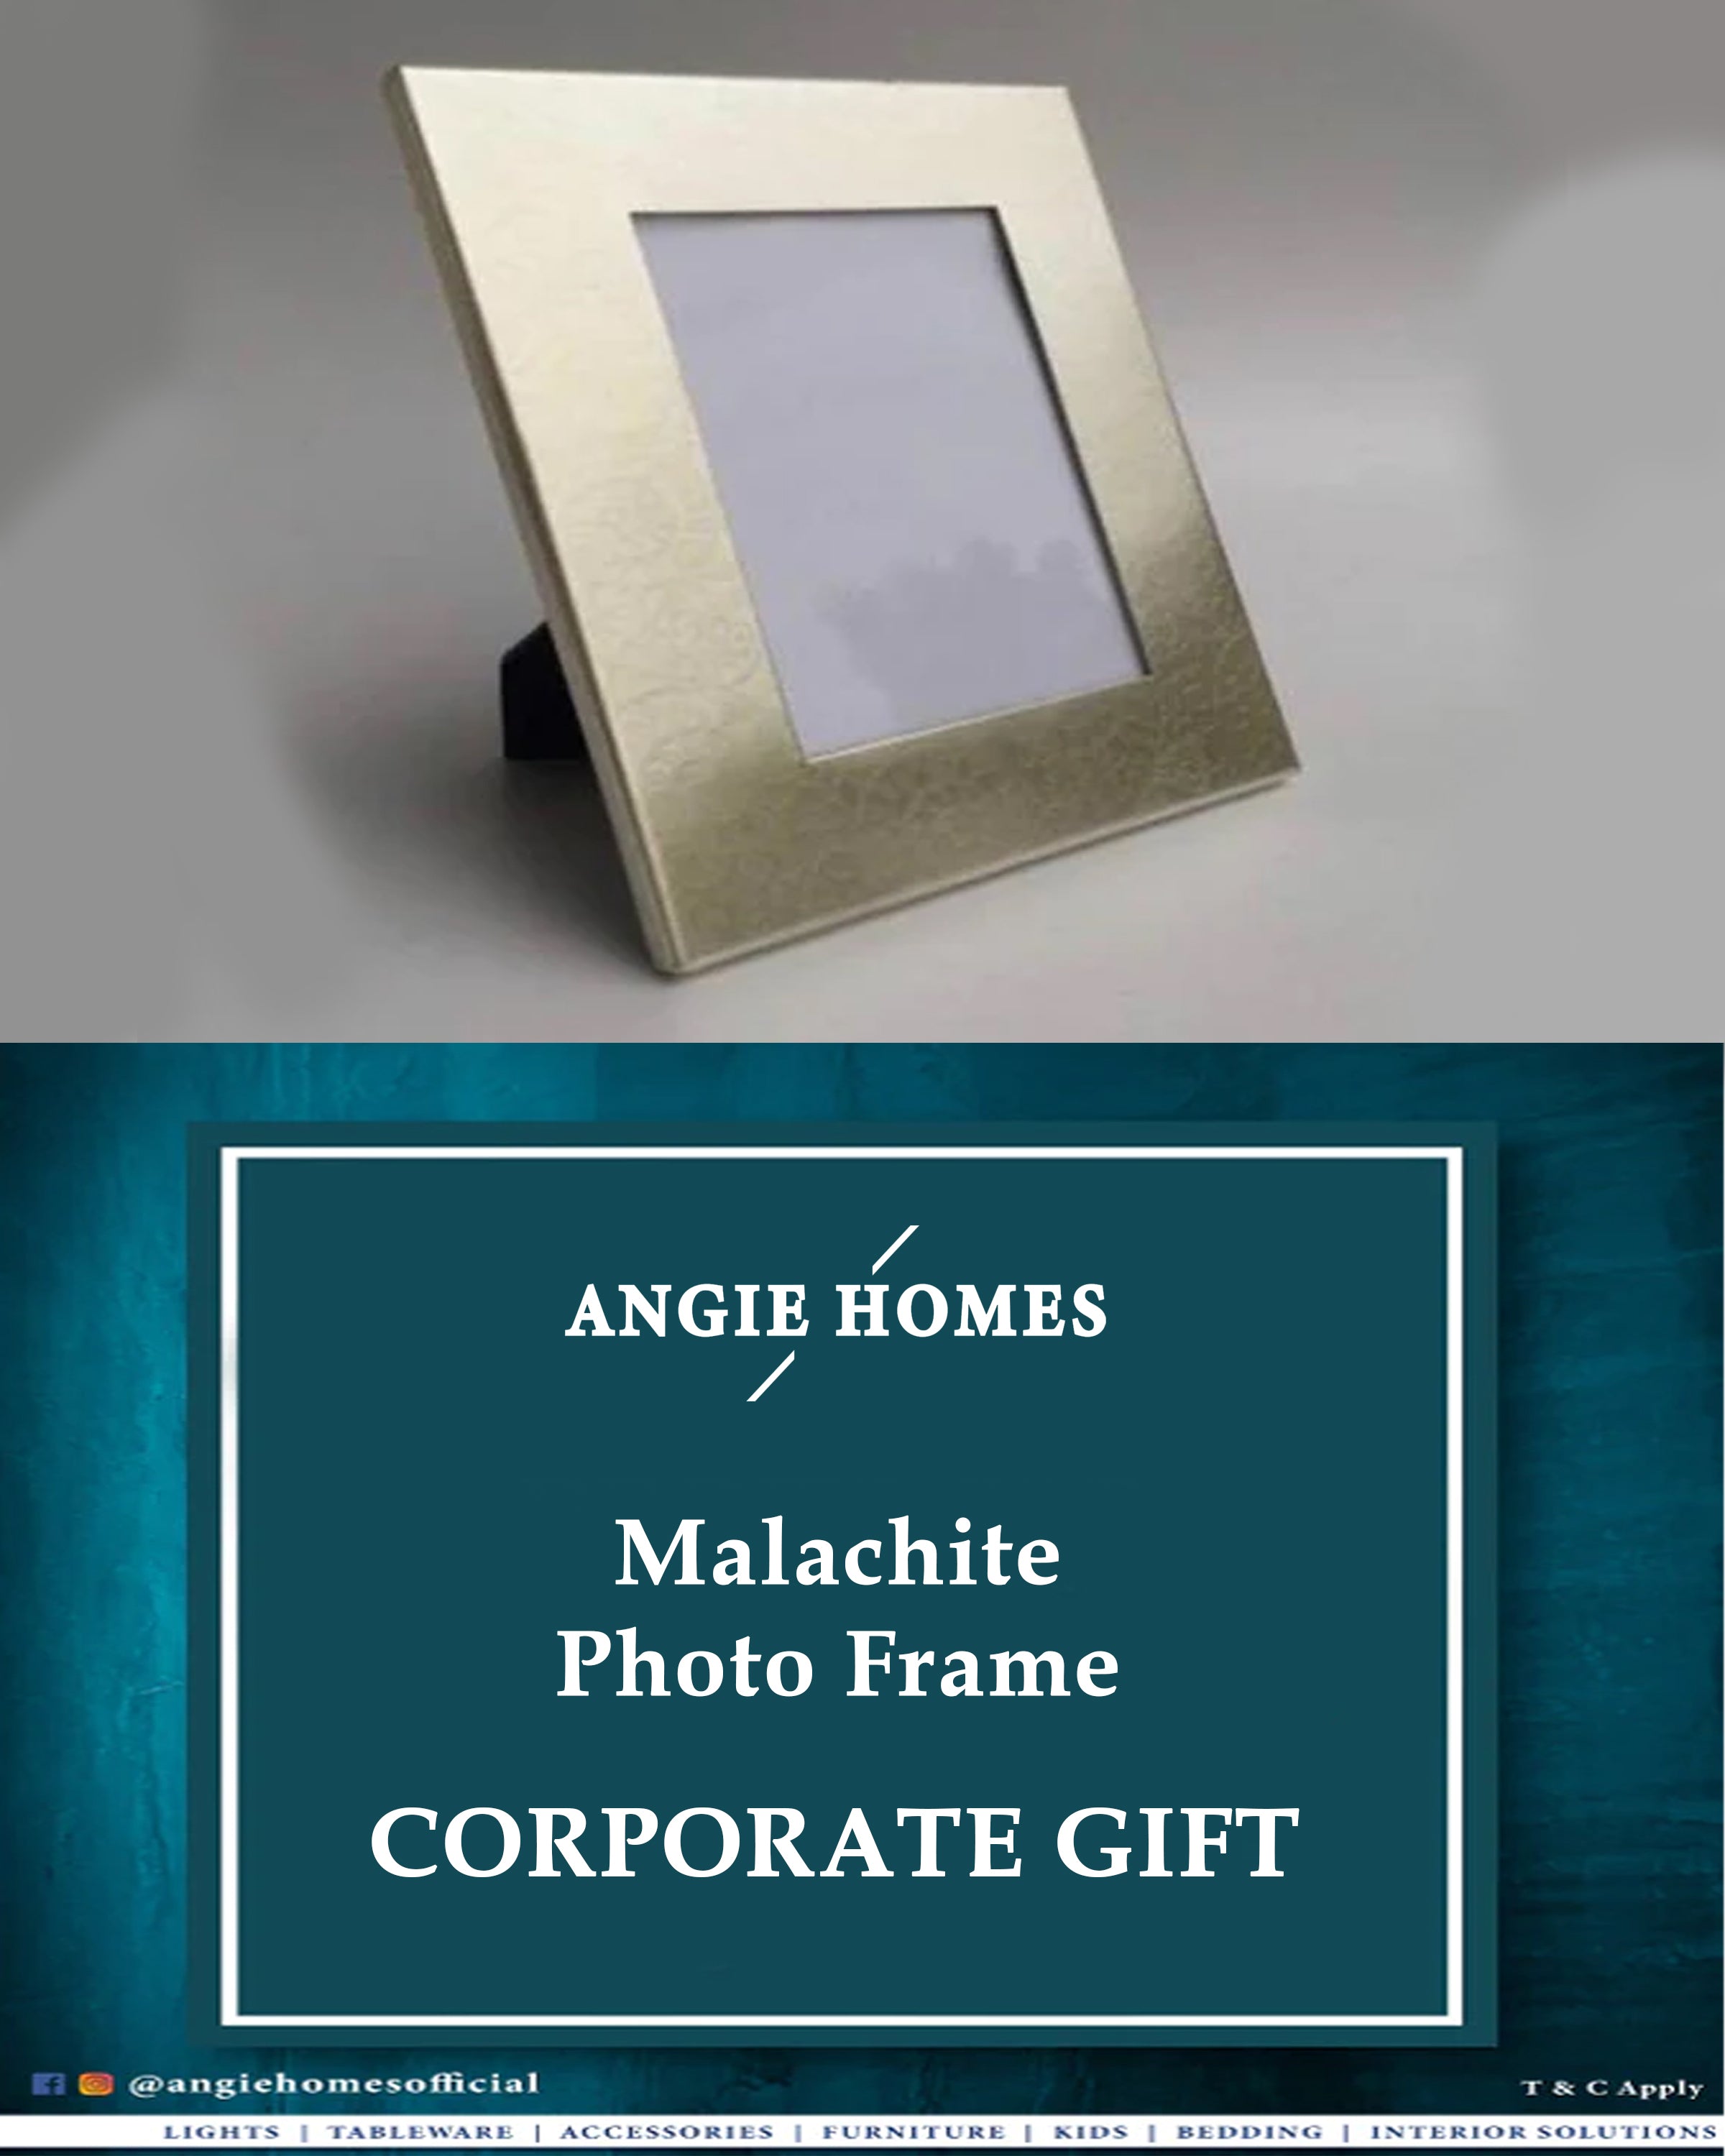 Malachite Photo Frame for Weddings, House Warming & Corporate Gift ANGIE HOMES